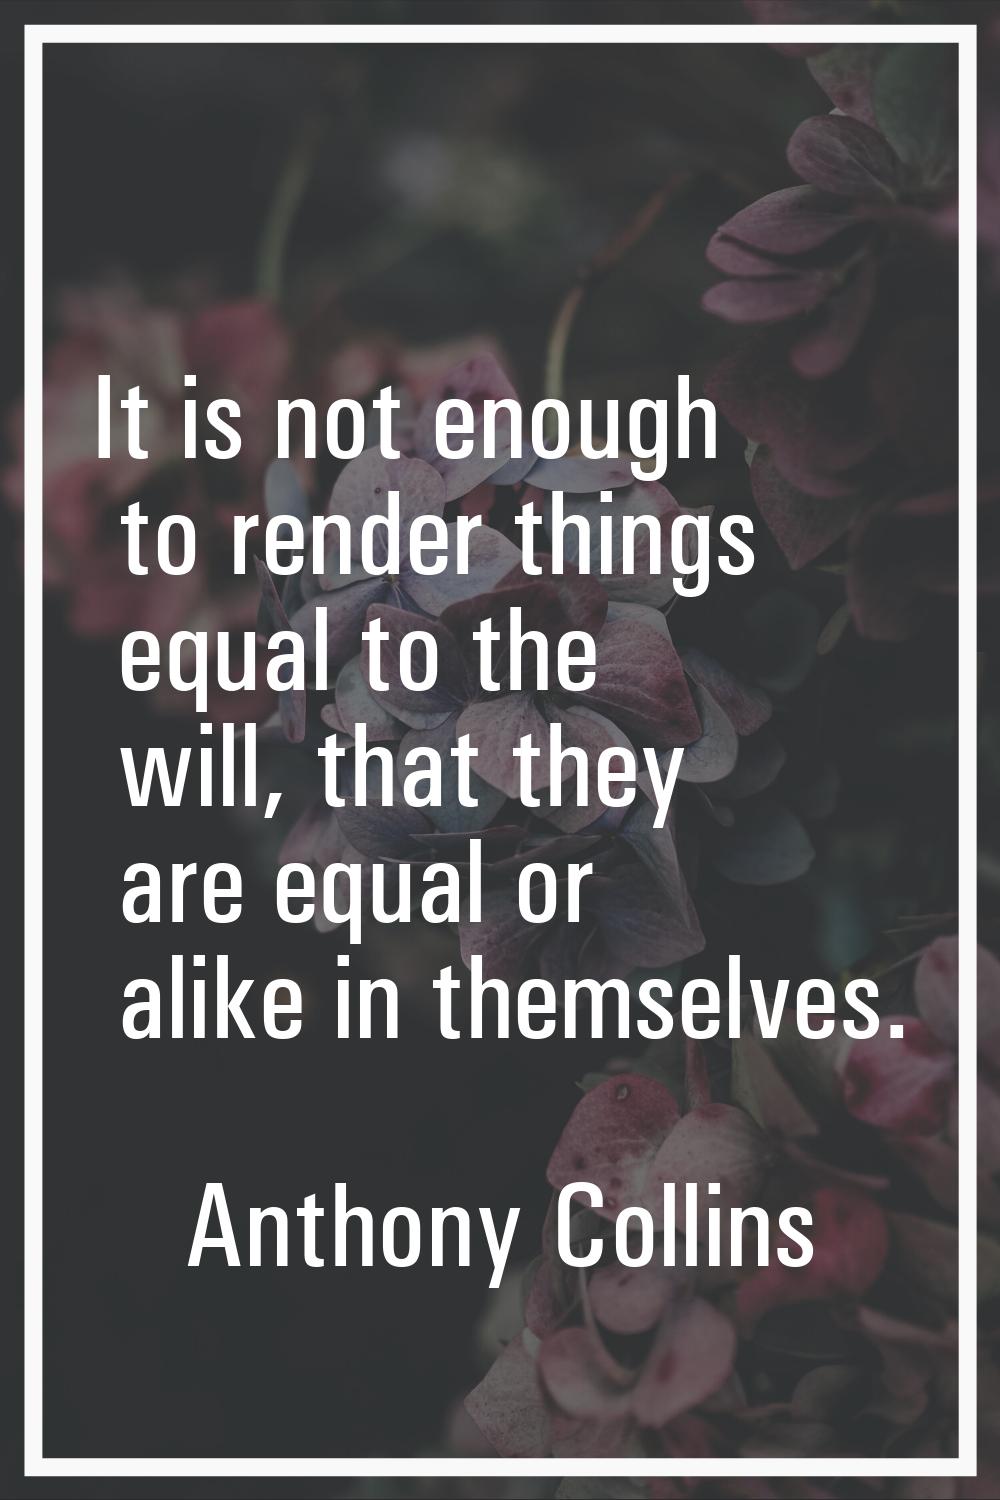 It is not enough to render things equal to the will, that they are equal or alike in themselves.